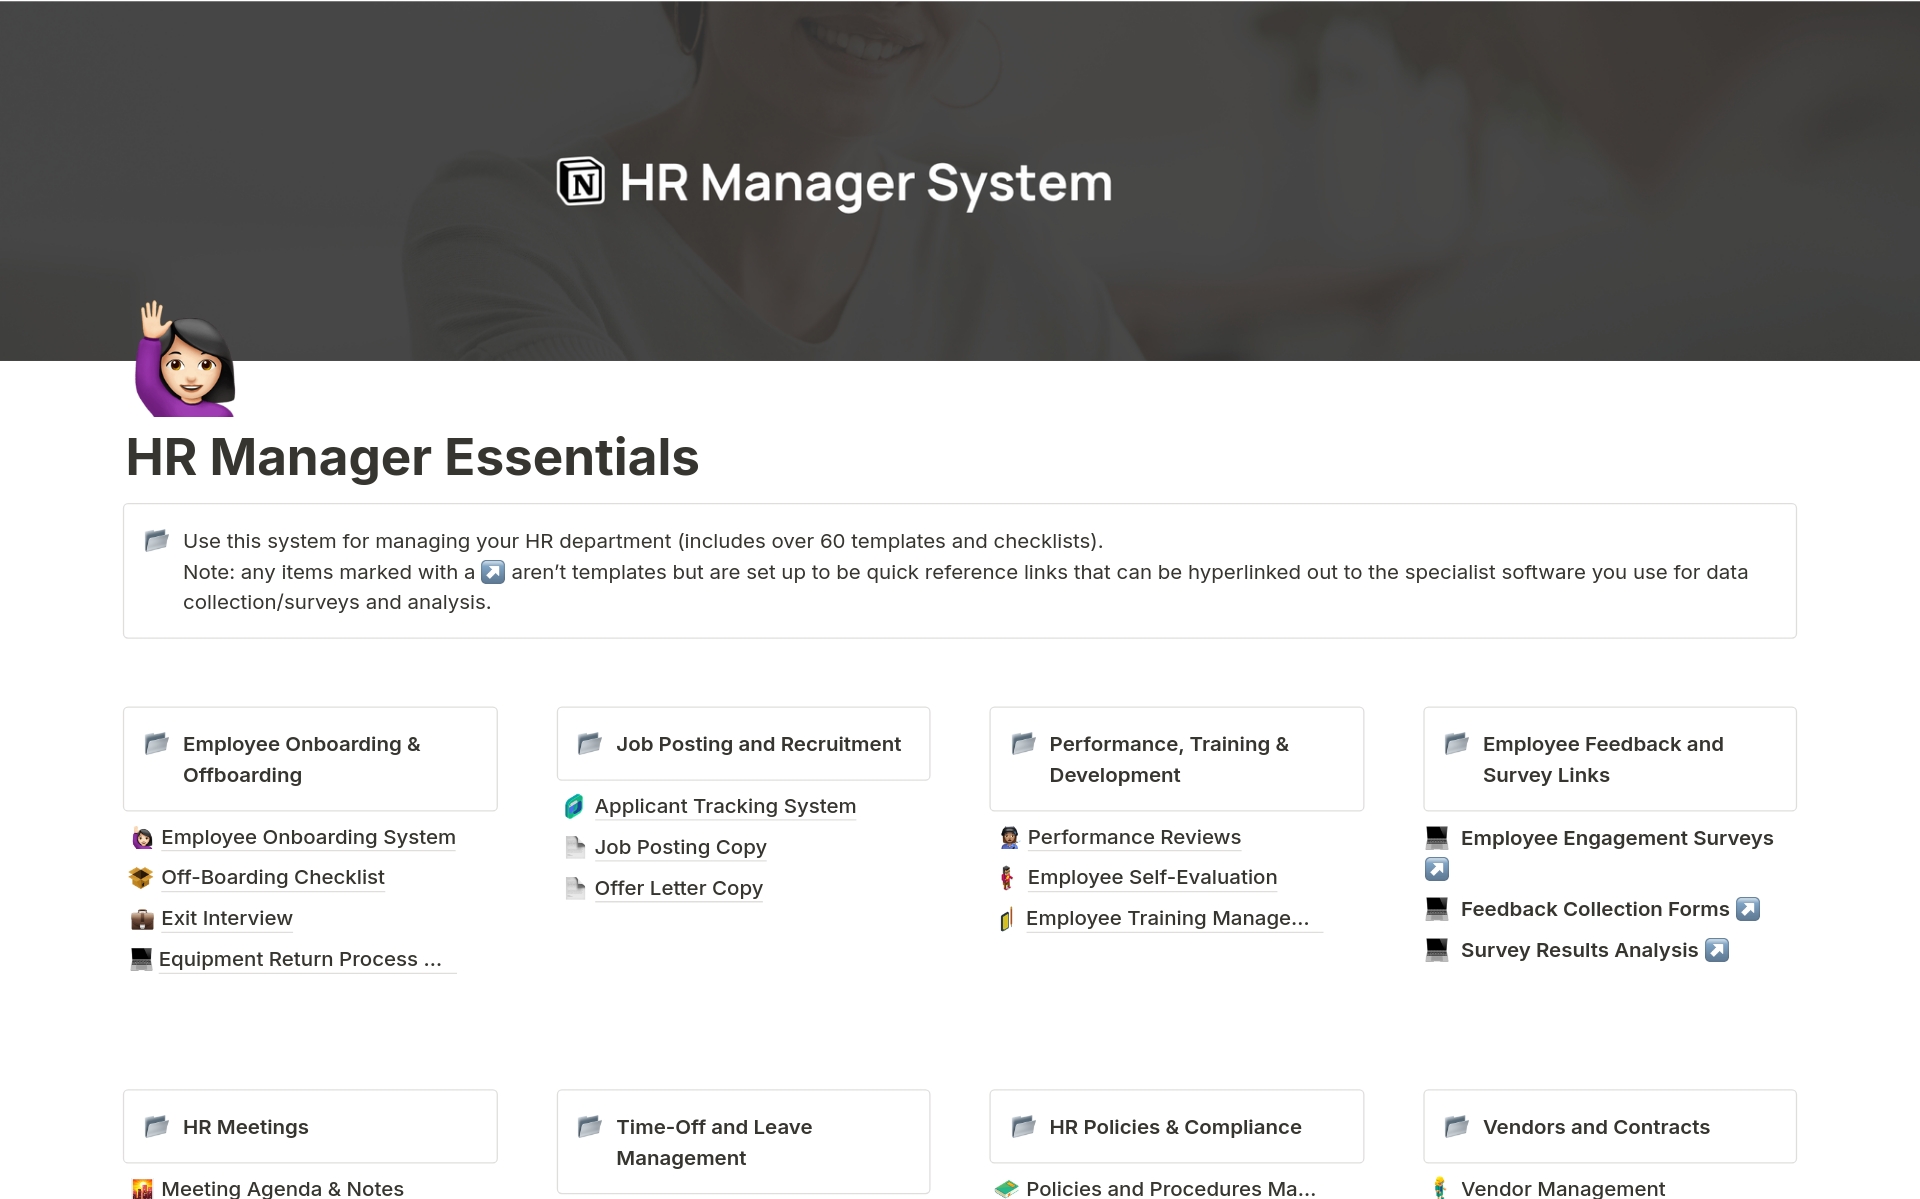 Use this system for managing your HR department (includes over 60 templates and checklists).